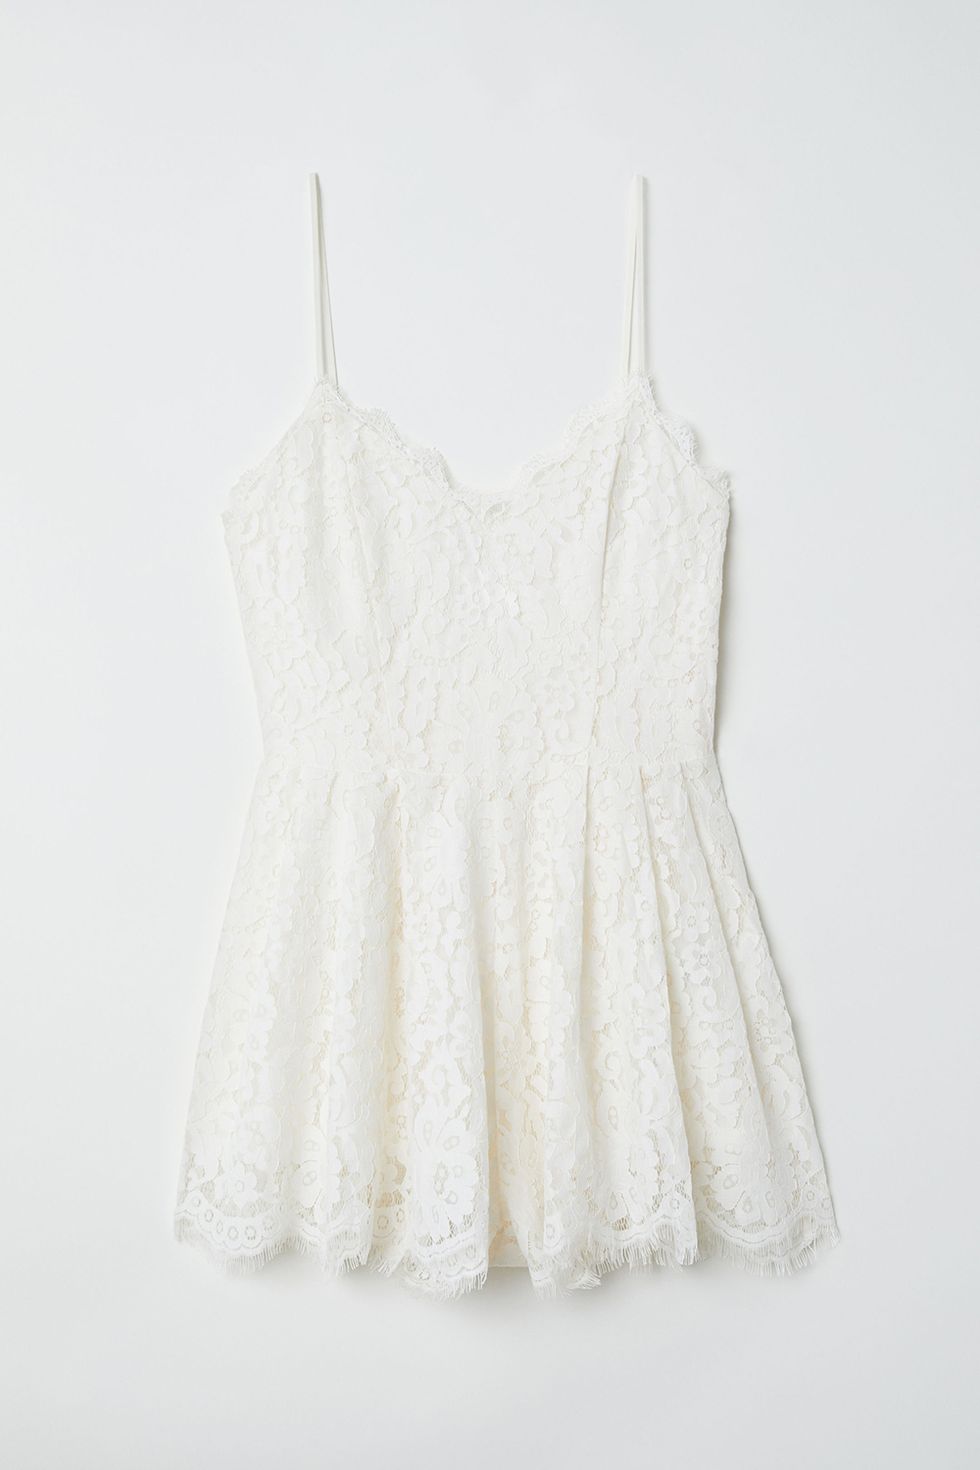 White, Clothing, Dress, Lace, Outerwear, camisoles, One-piece garment, Day dress, Blouse, Beige, 